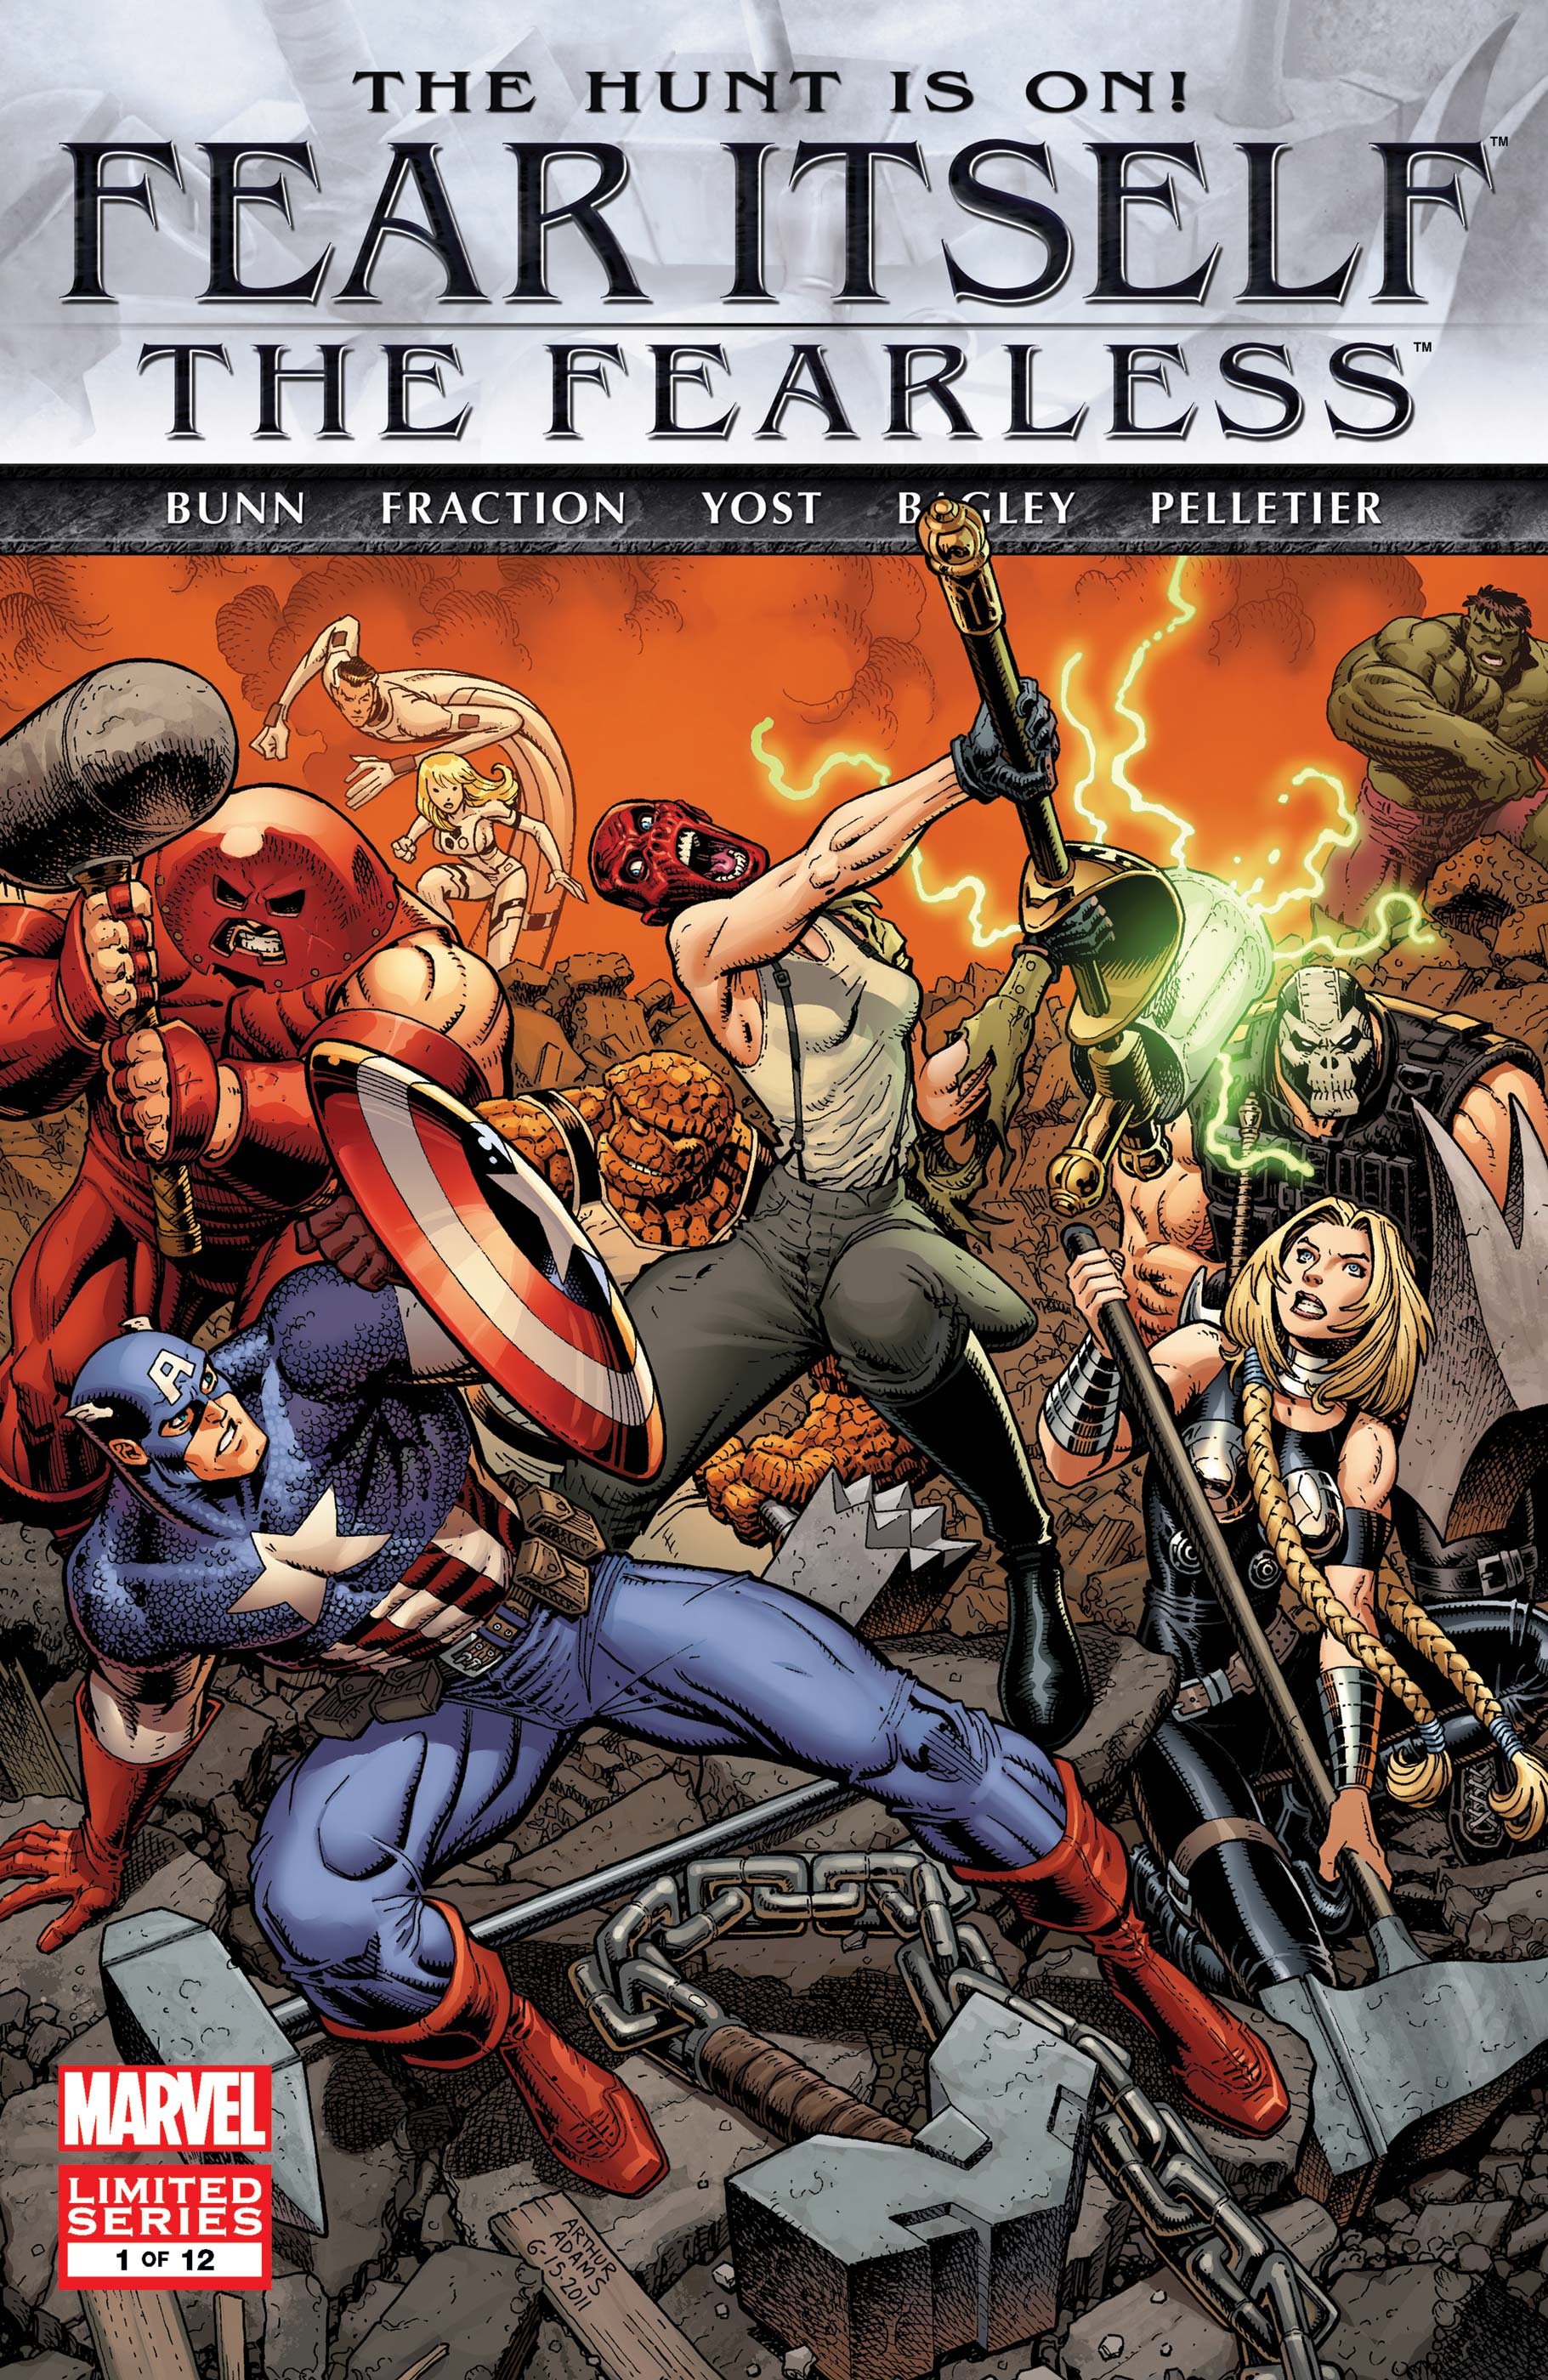 Cover of Fear Itself showcasing Captain America and Valkyrie fighting side by side